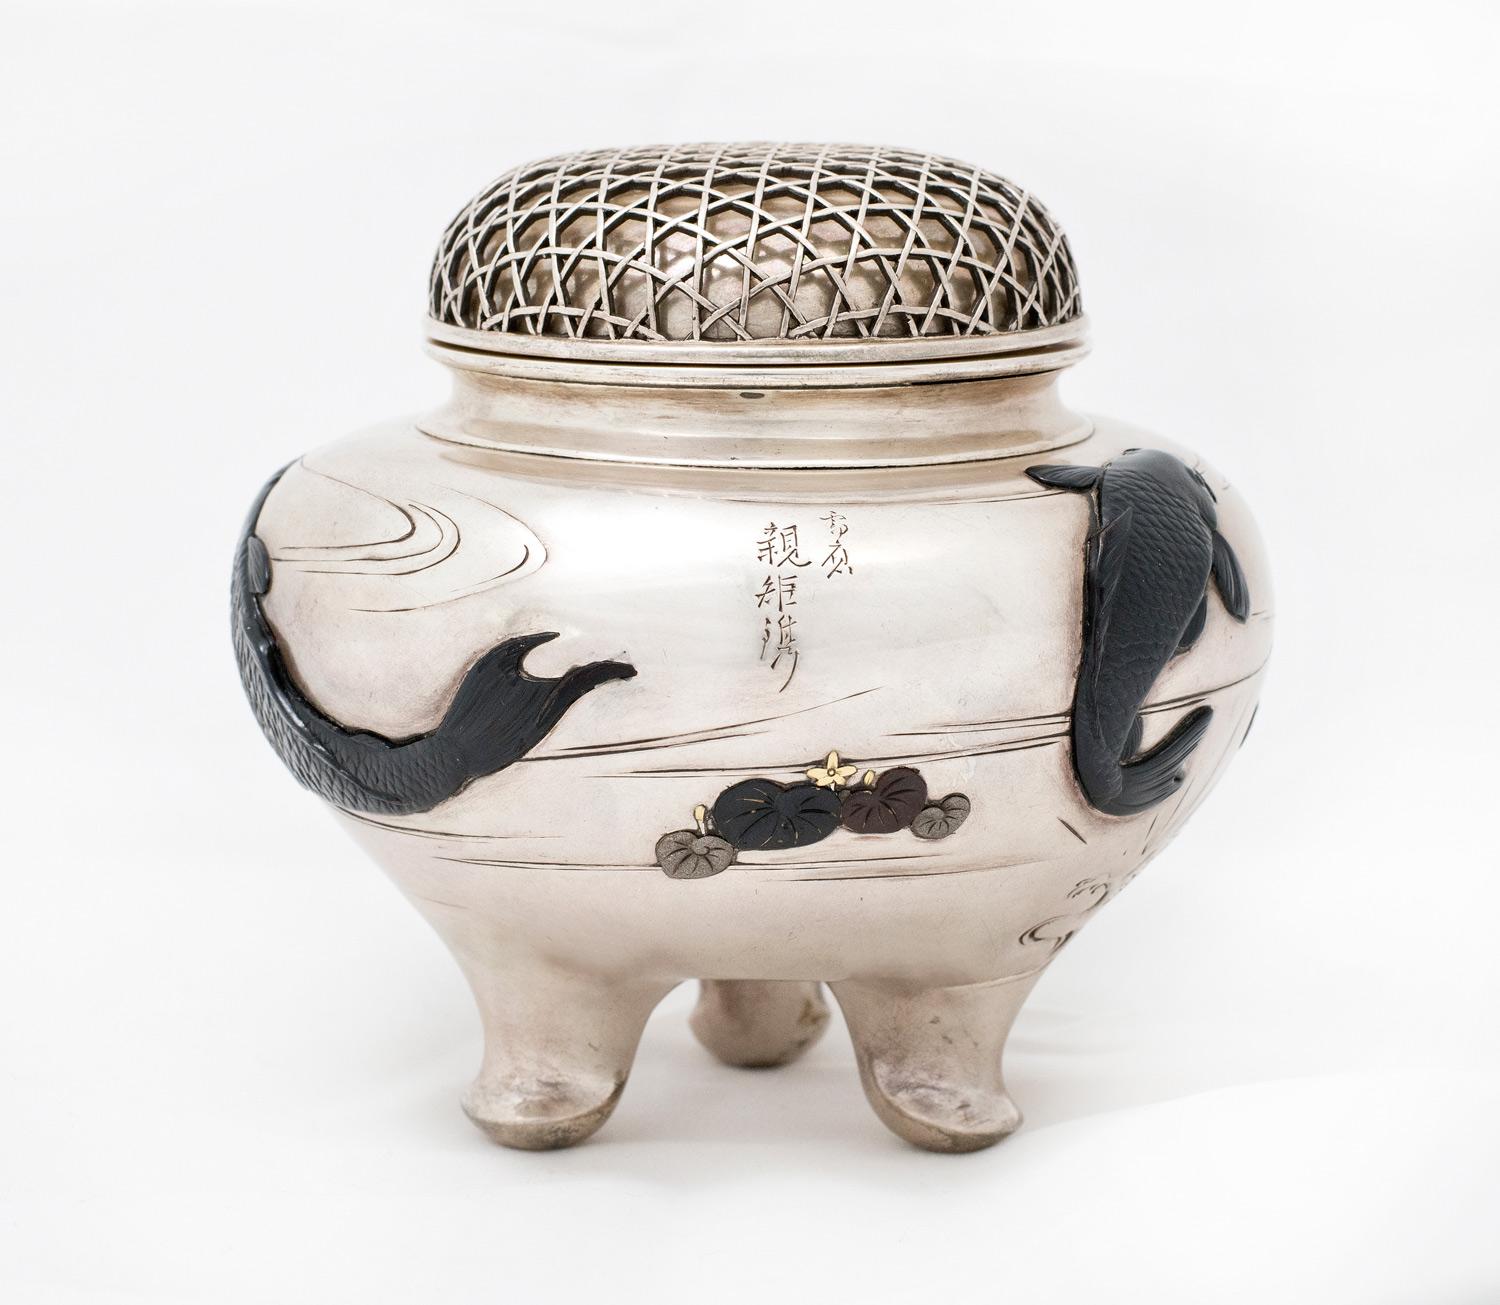 As part of our Japanese works of art collection we are delighted to offer this super quality Meiji Period 1868-1912, pure silver and mixed metal koro or incense burner, the heavy silver body stands upon a three legged base and has been cast with